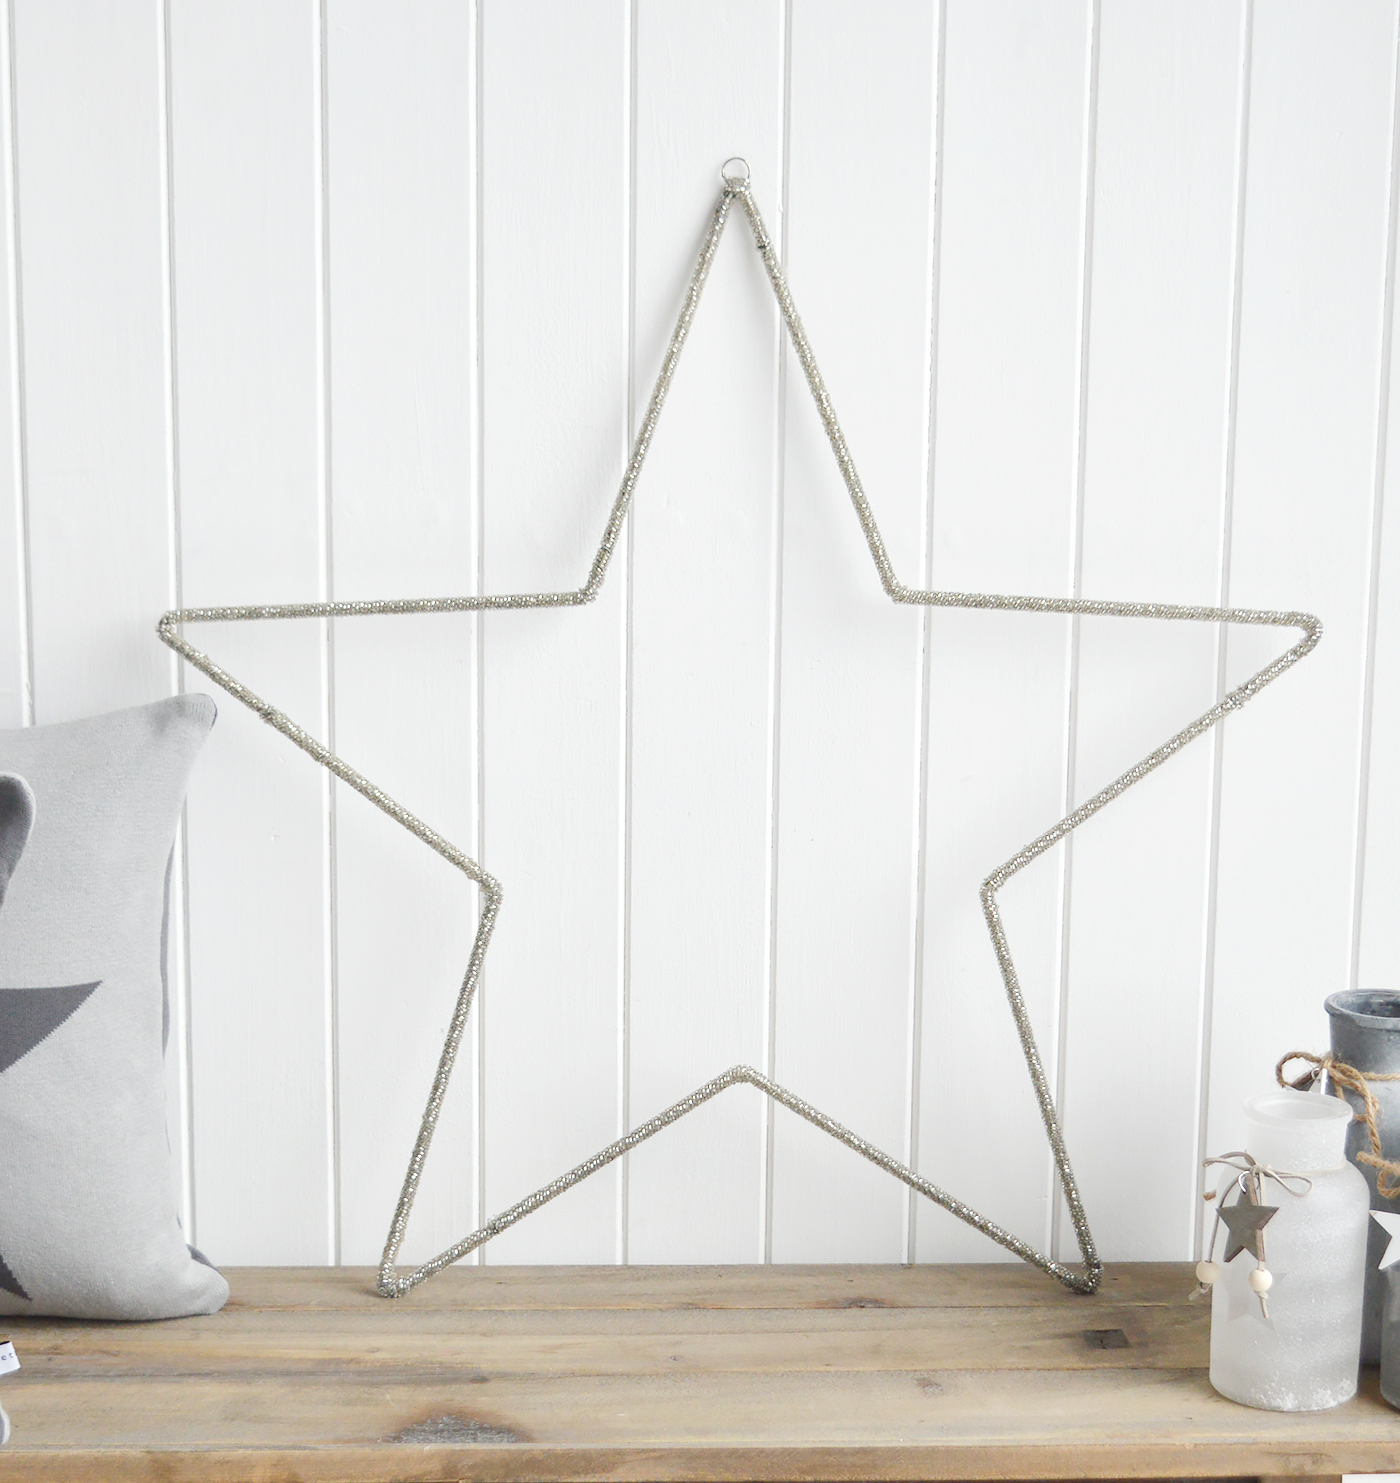 The White Lighthouse. White Furniture, New England country, coastal and city home interiors - Glass beaded decorative stars